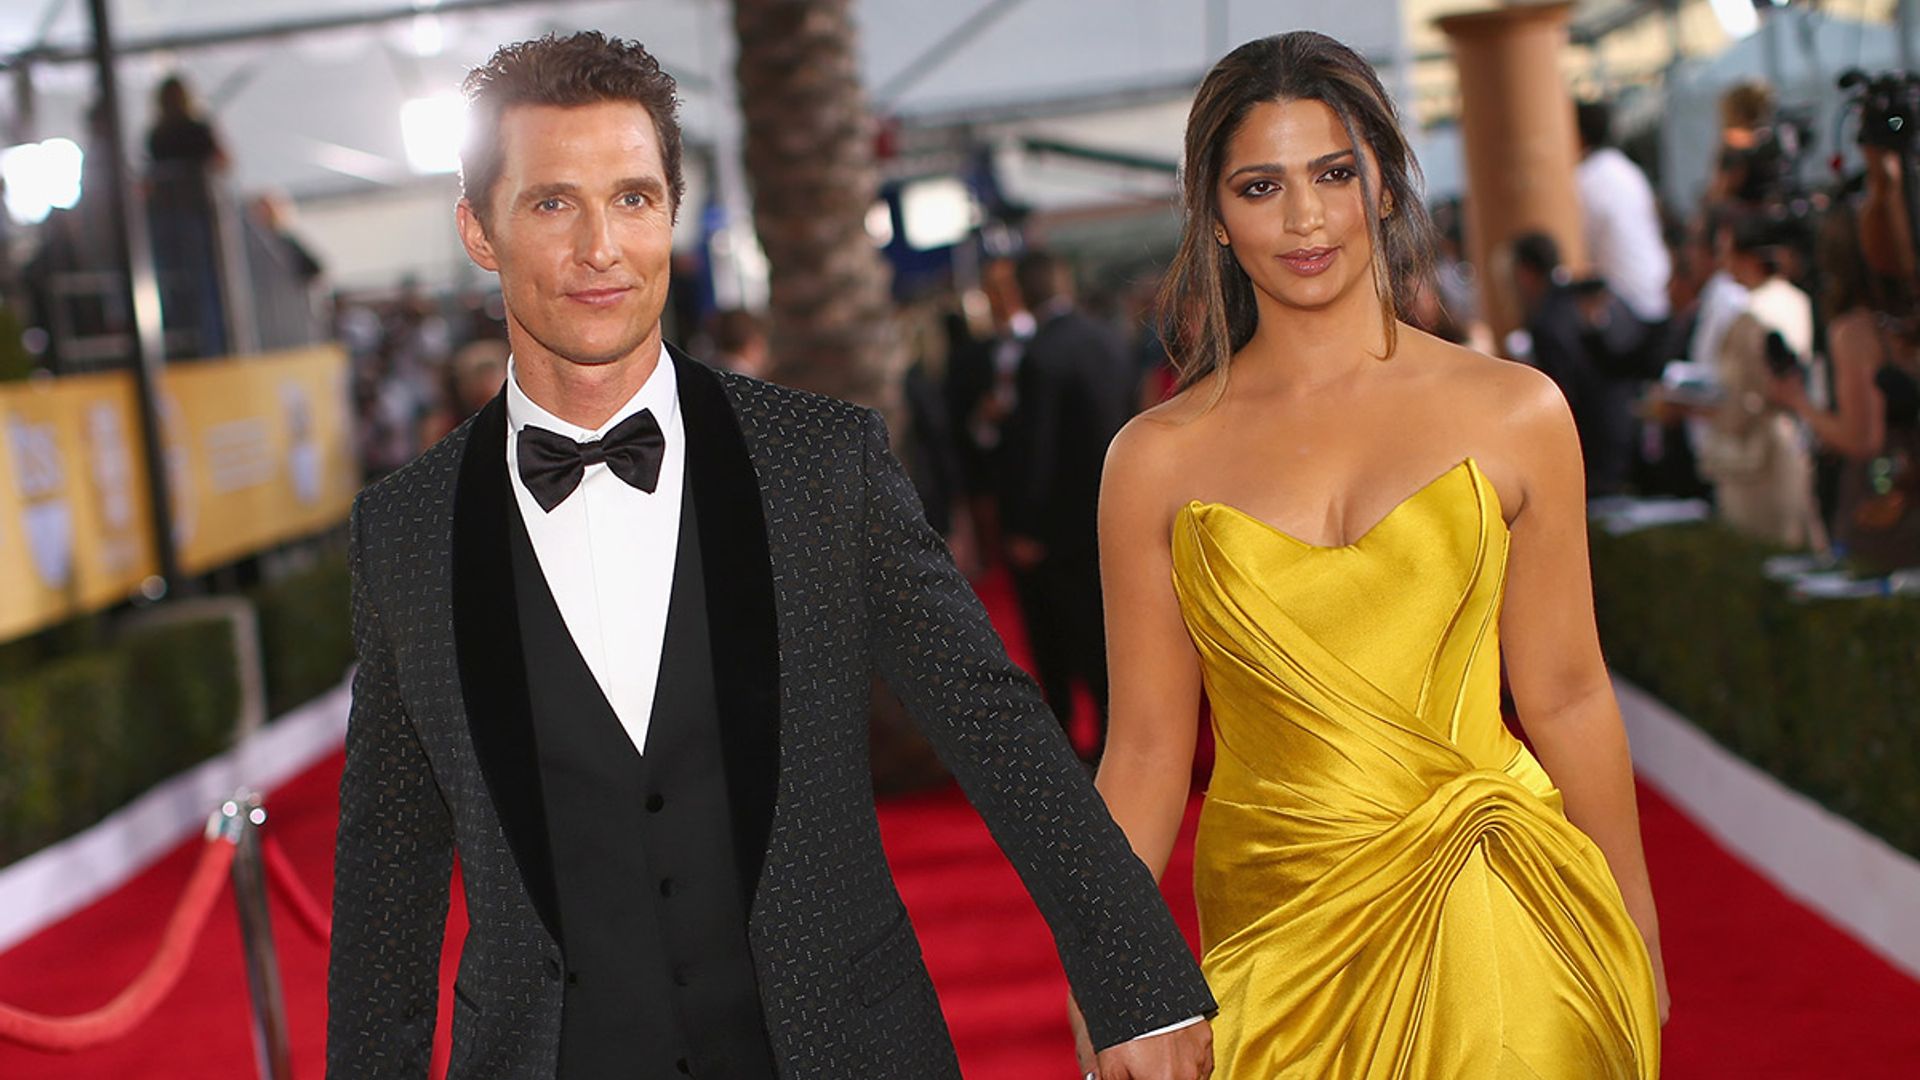 Matthew McConaughey's wife reveals they've expanded their family